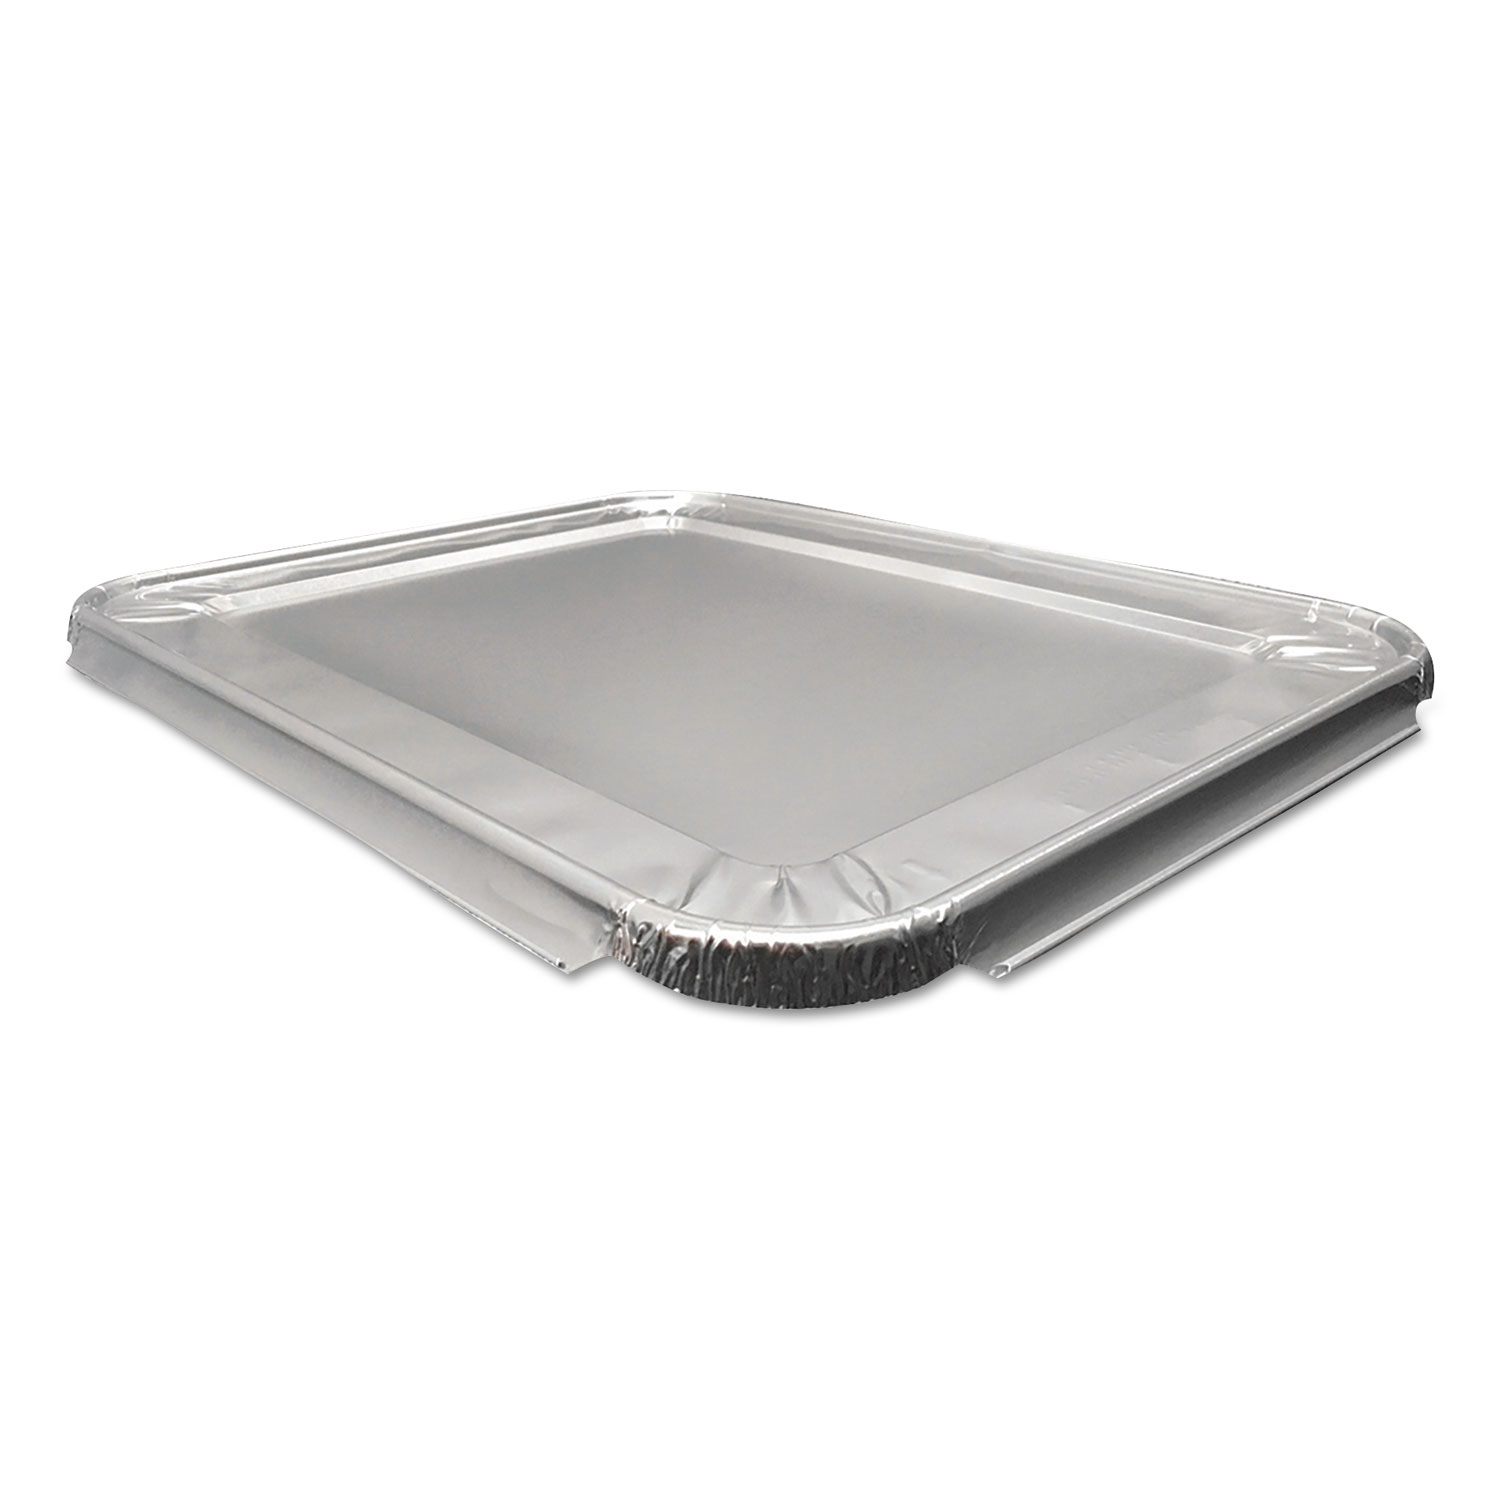  Durable Packaging 8200-100 Aluminum Steam Table Lids for Heavy-Duty Half Size Pan, 100 /Carton (DPK8200100) 